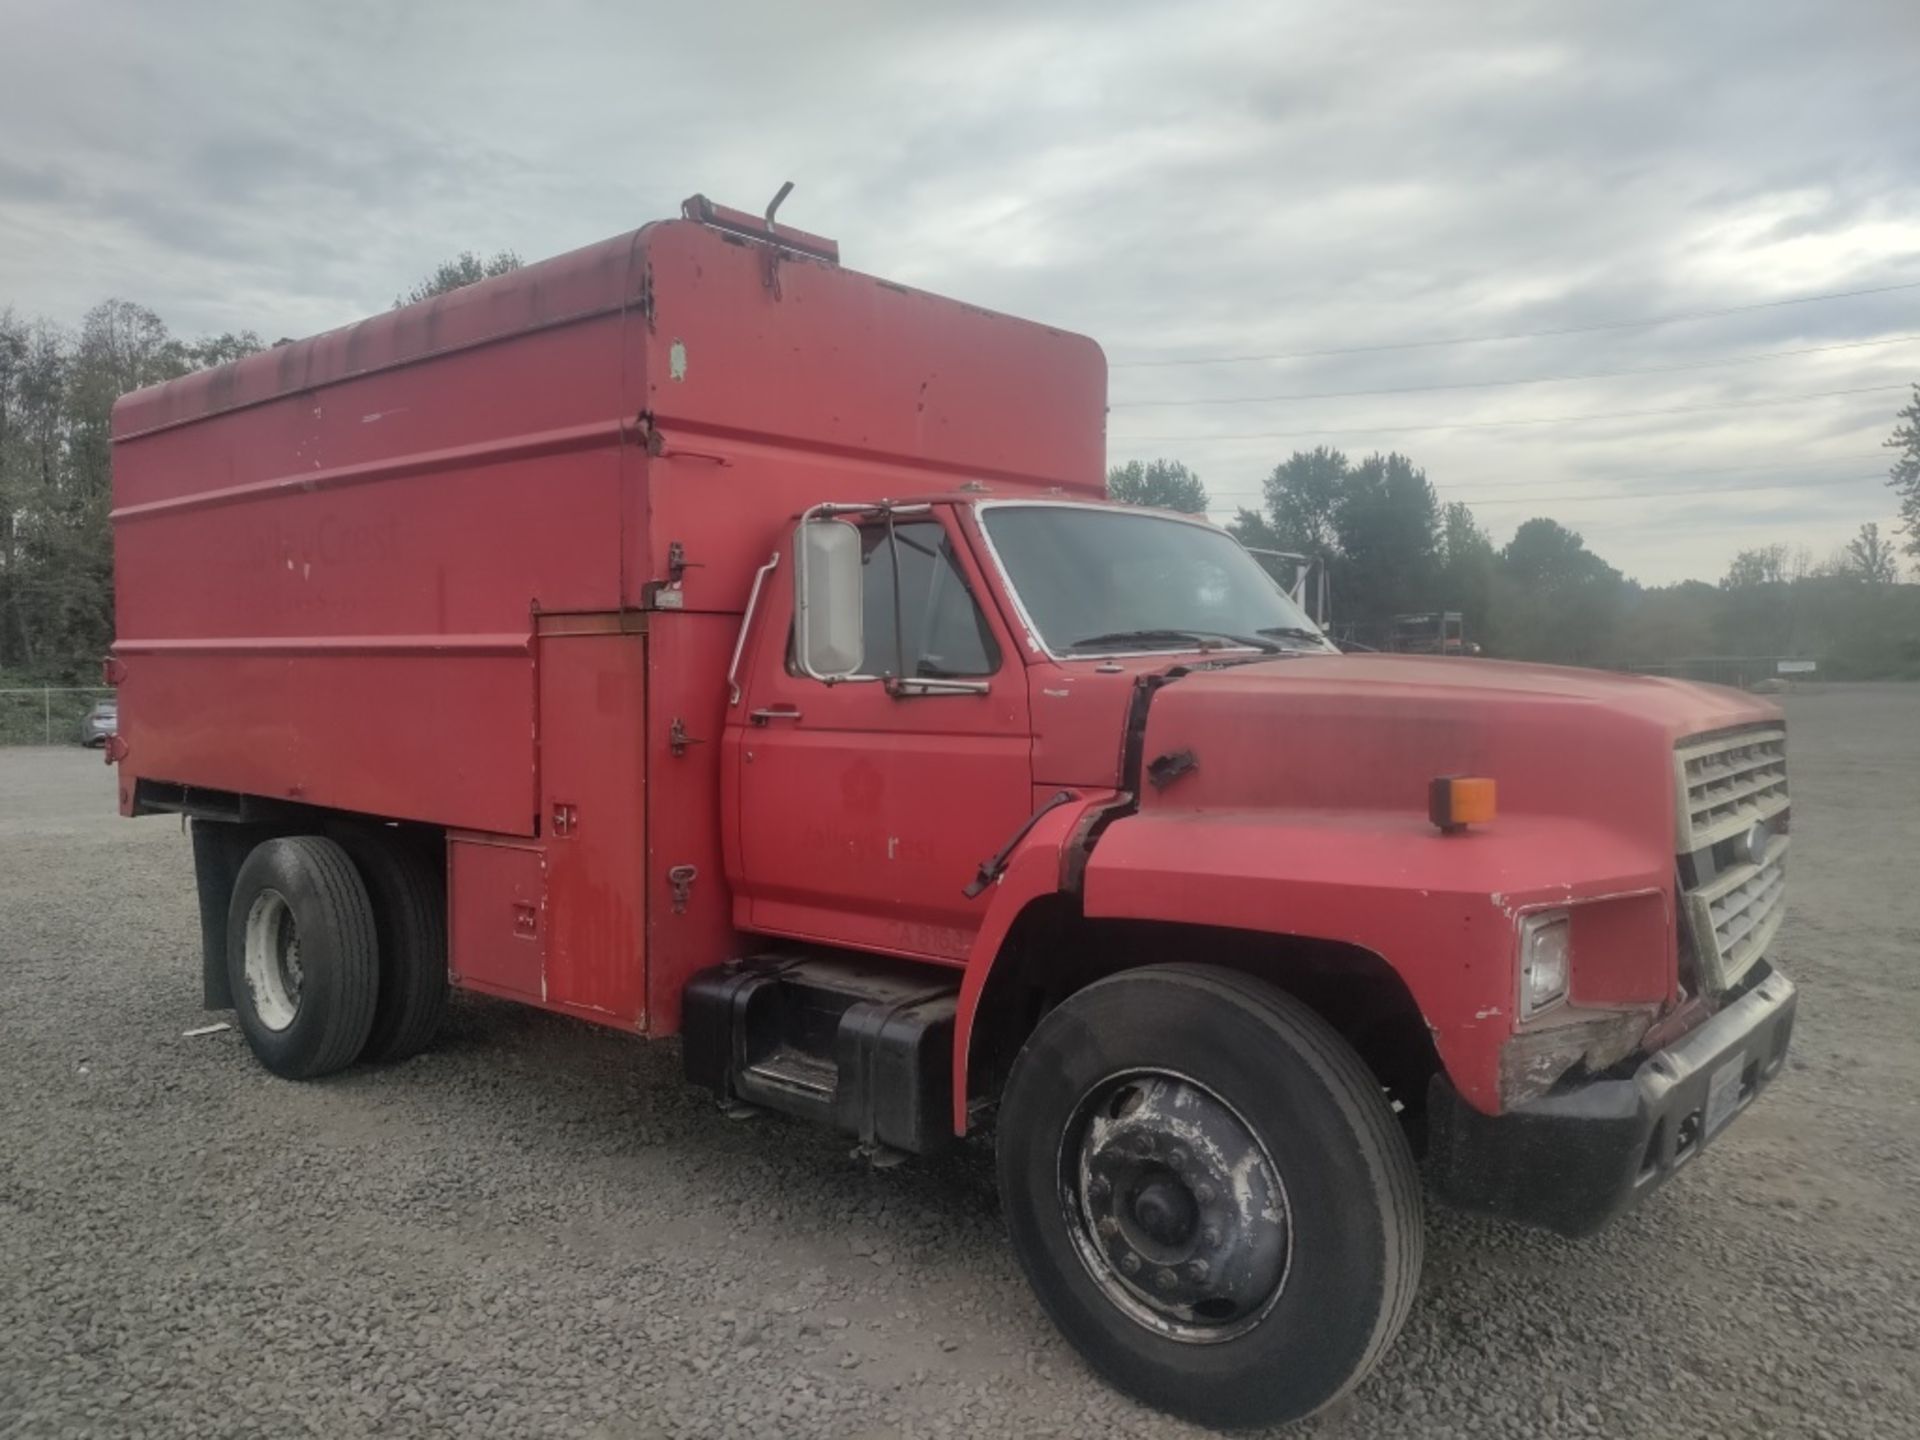 1992 Ford Chip Truck - Image 2 of 20